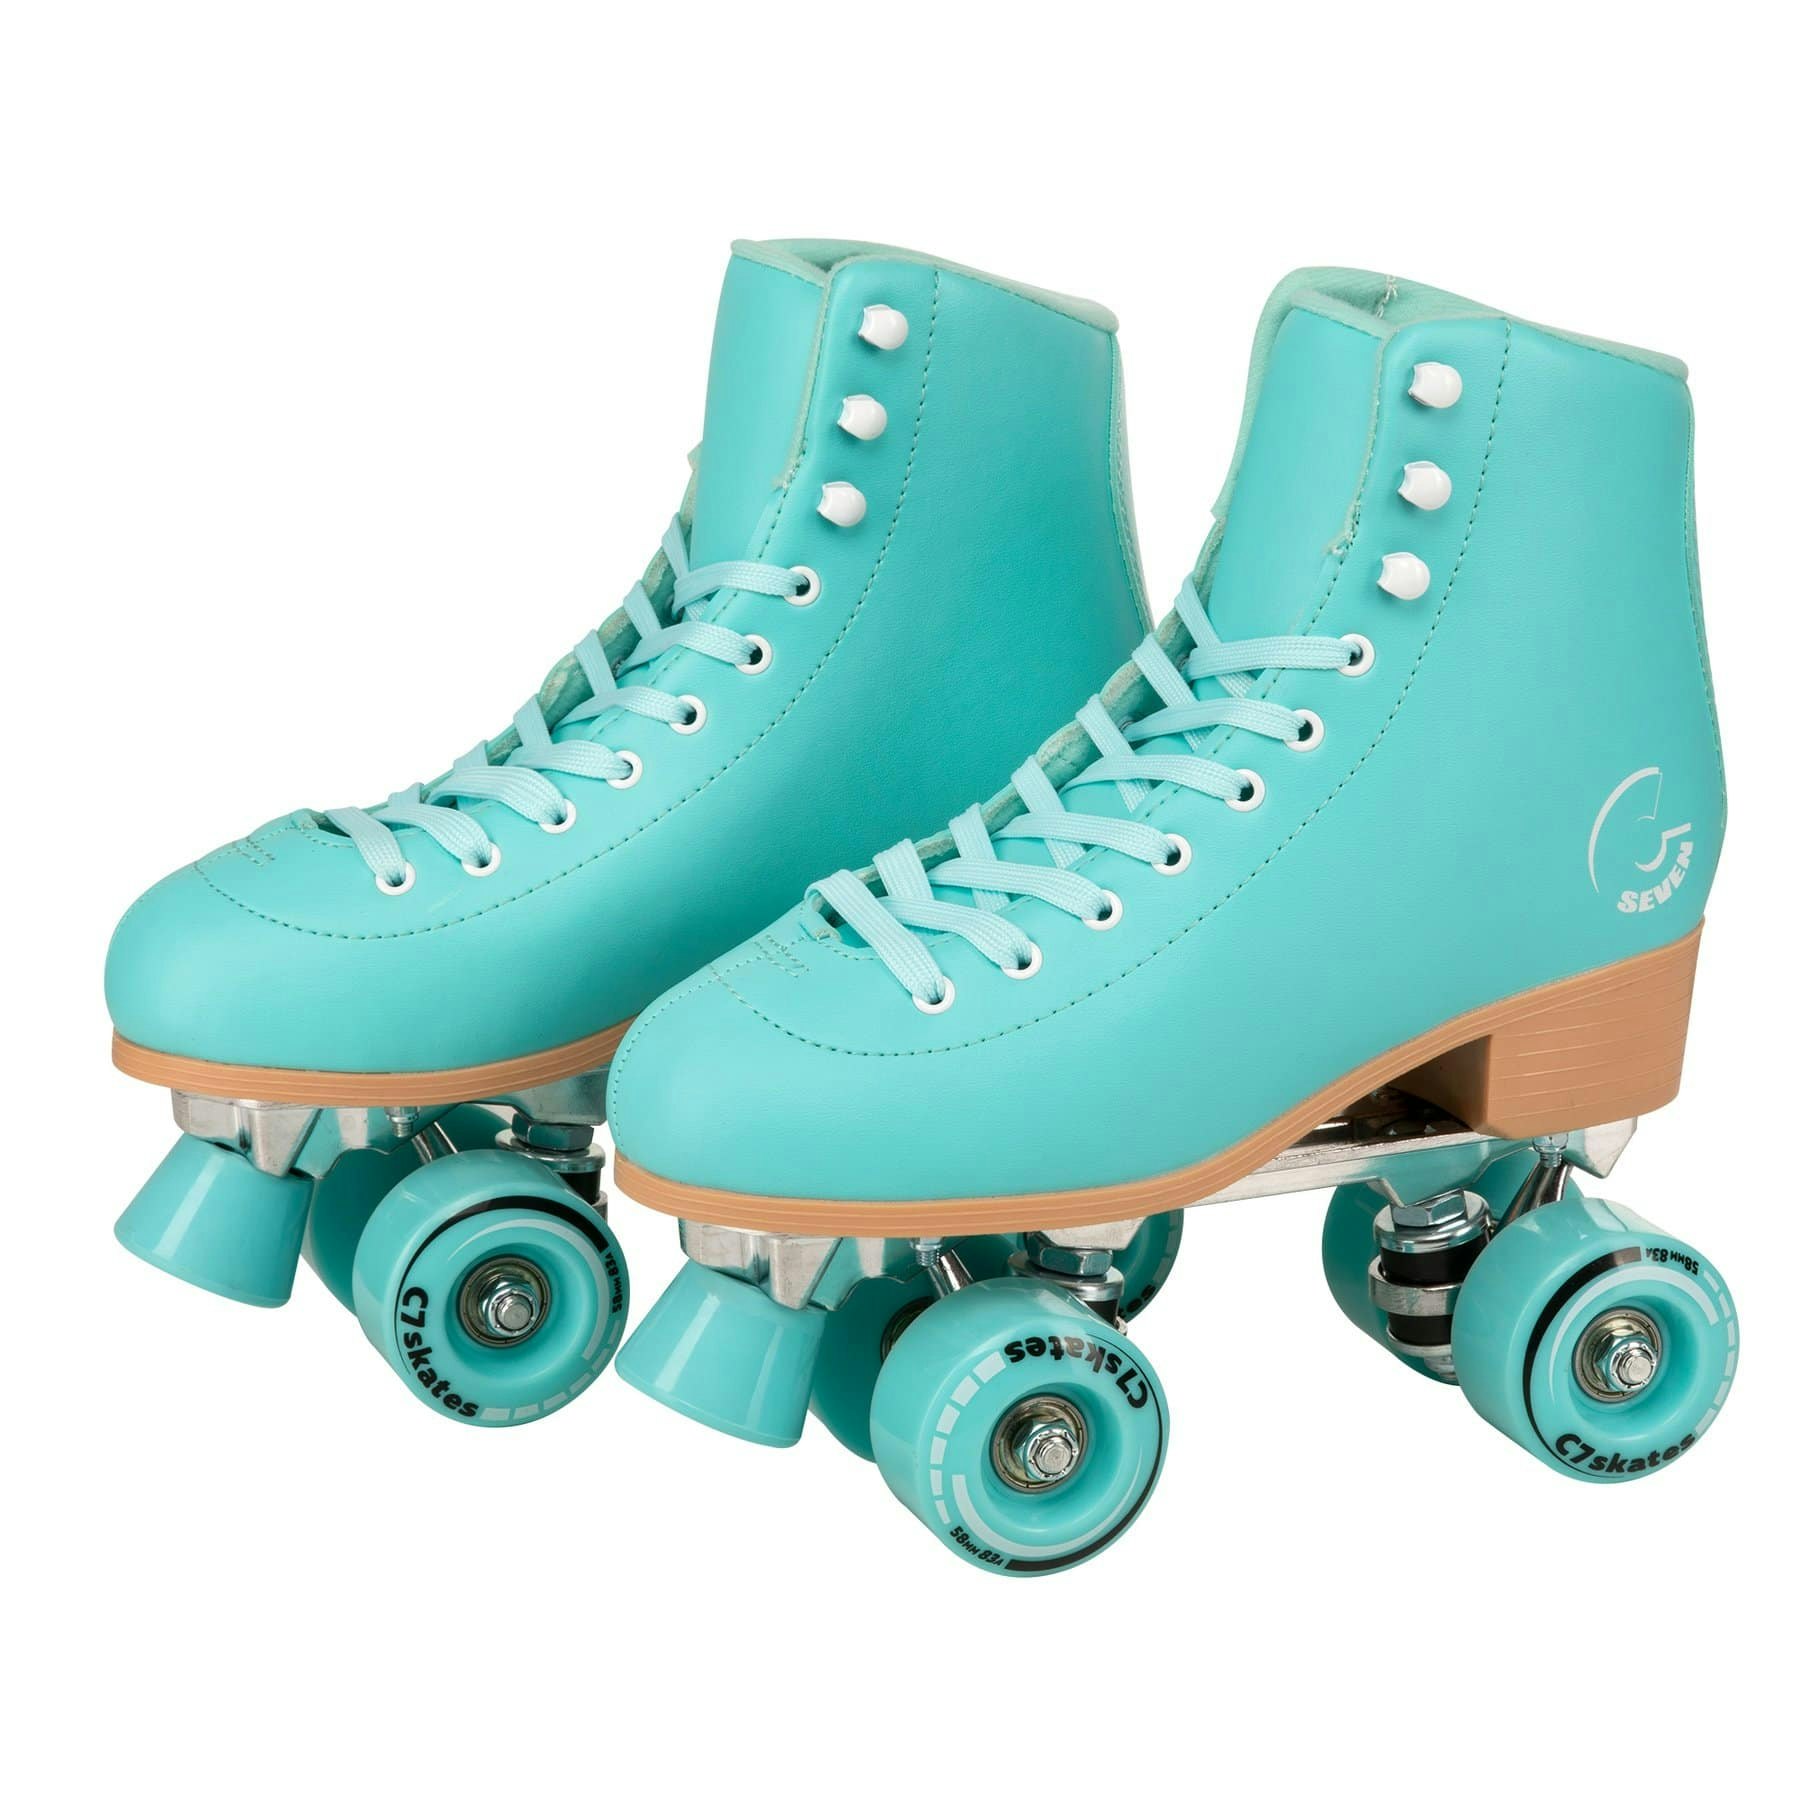 Quad Roller Skates for Girls and Women Size 5 Youth Colorful Flower Rollerskates 